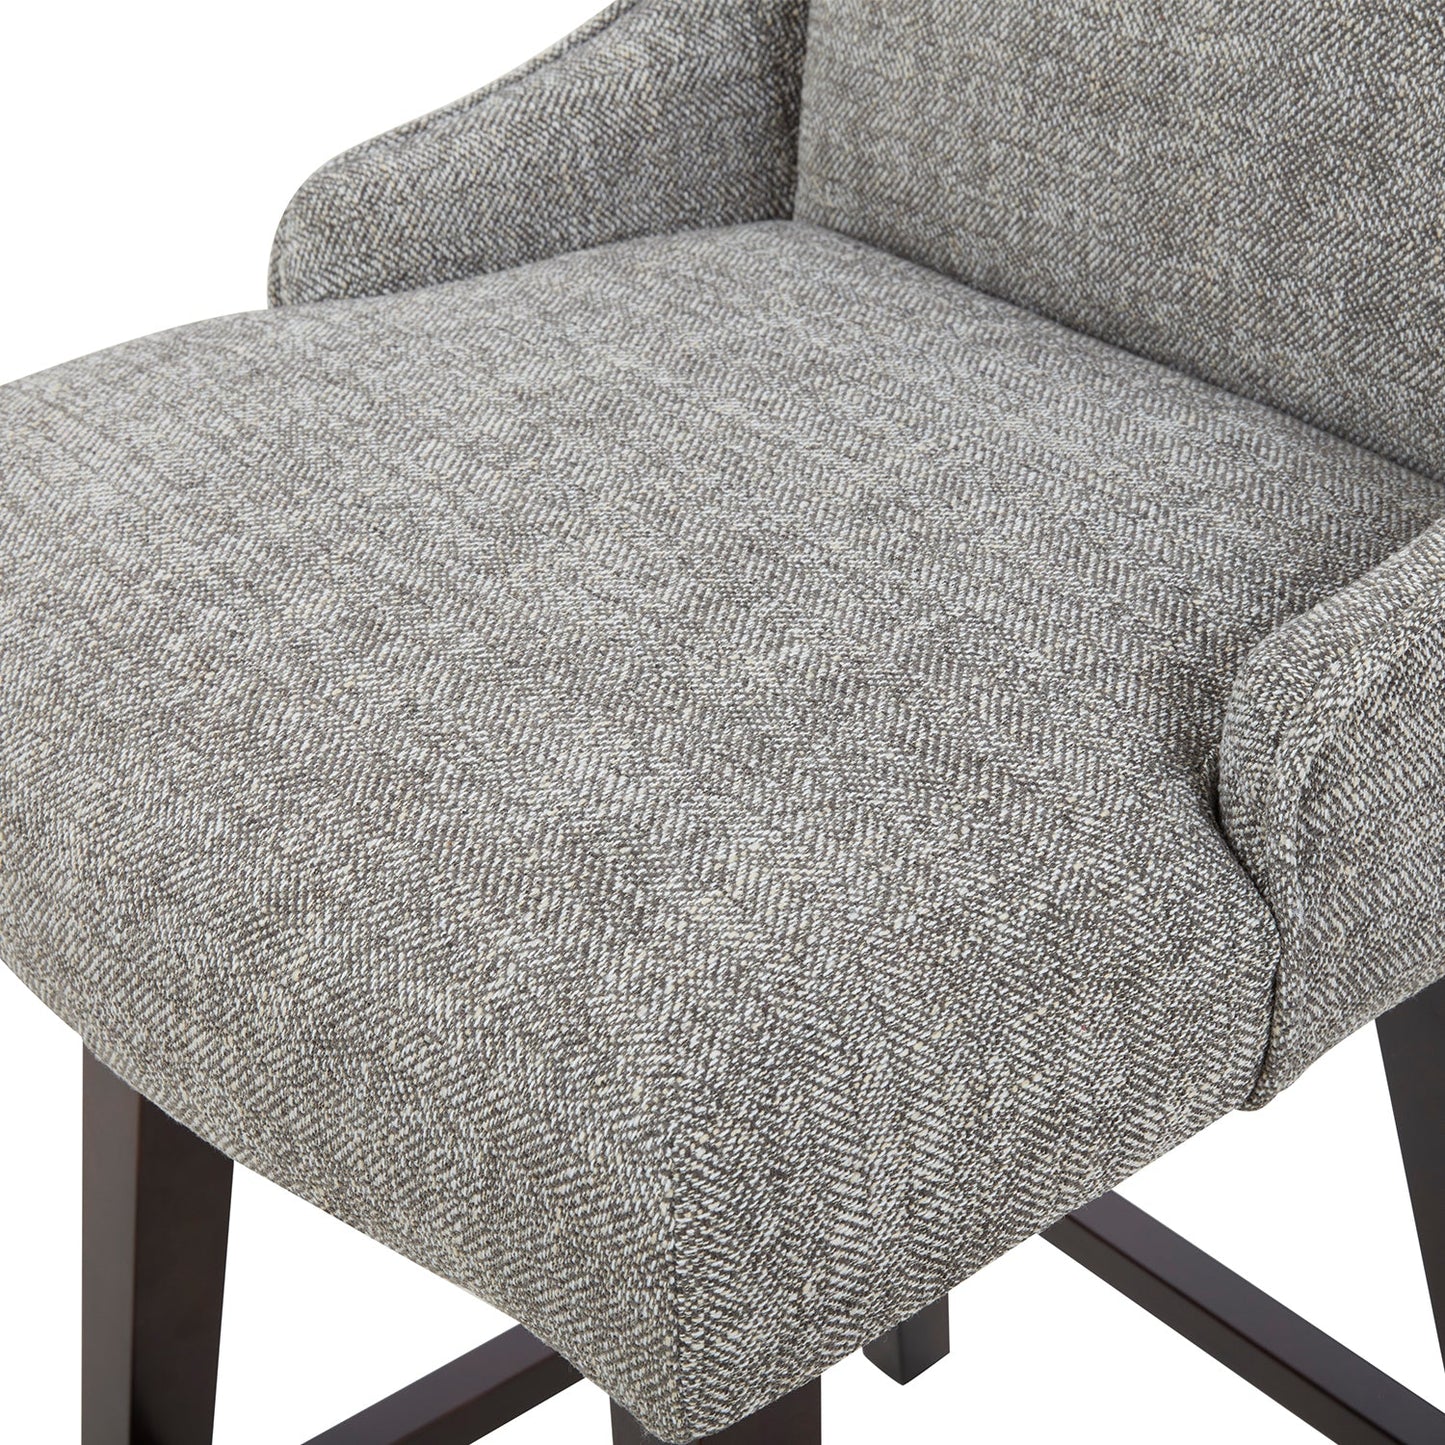 CHITA LIVING-Ryker Transitional Swivel Counter Stool - Fabric & Leather-Counter Stools-Fabric-Pebble Gray-2 Pack